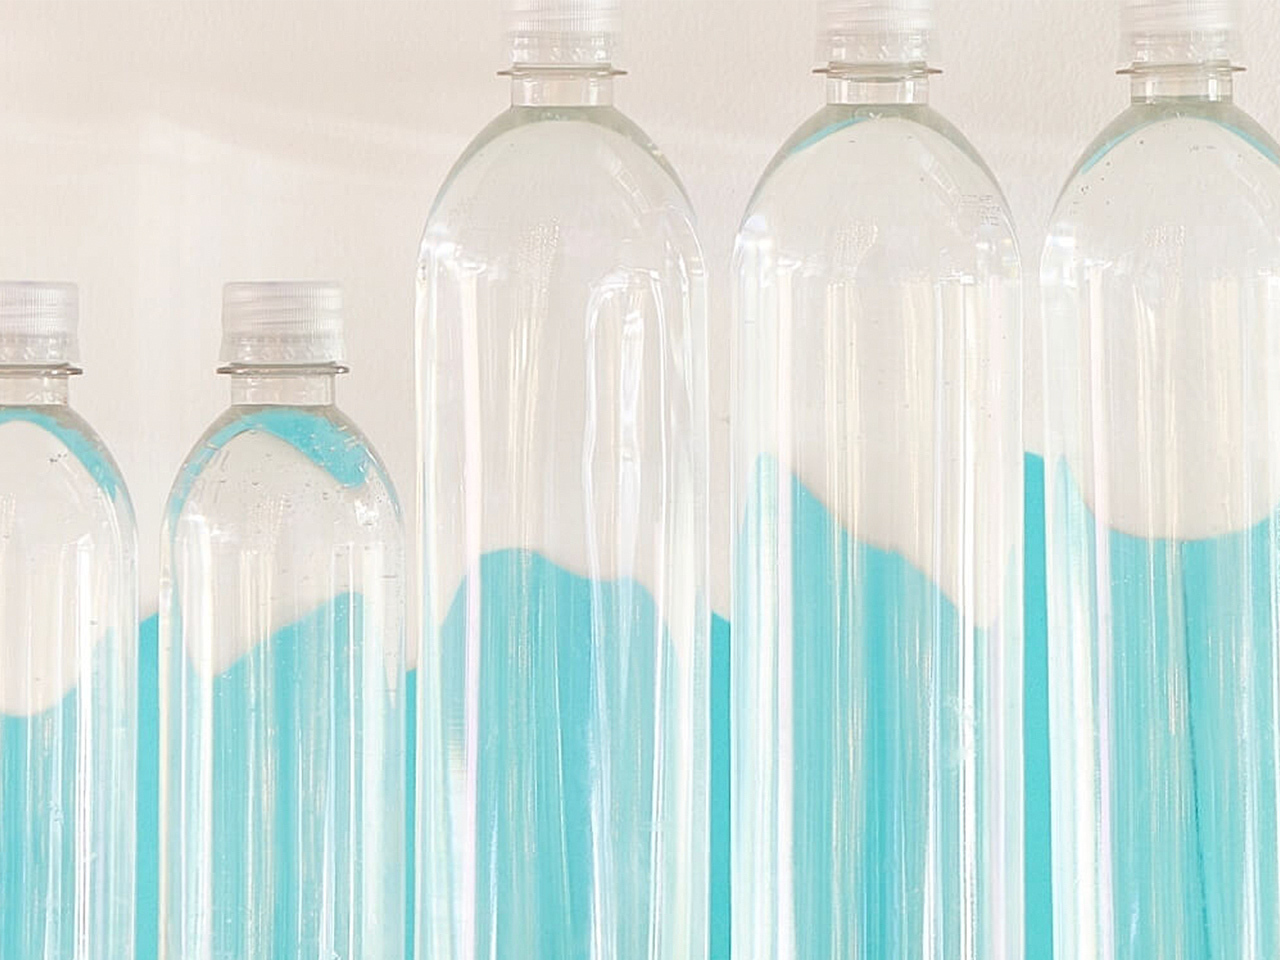 Plastic bottles in a row